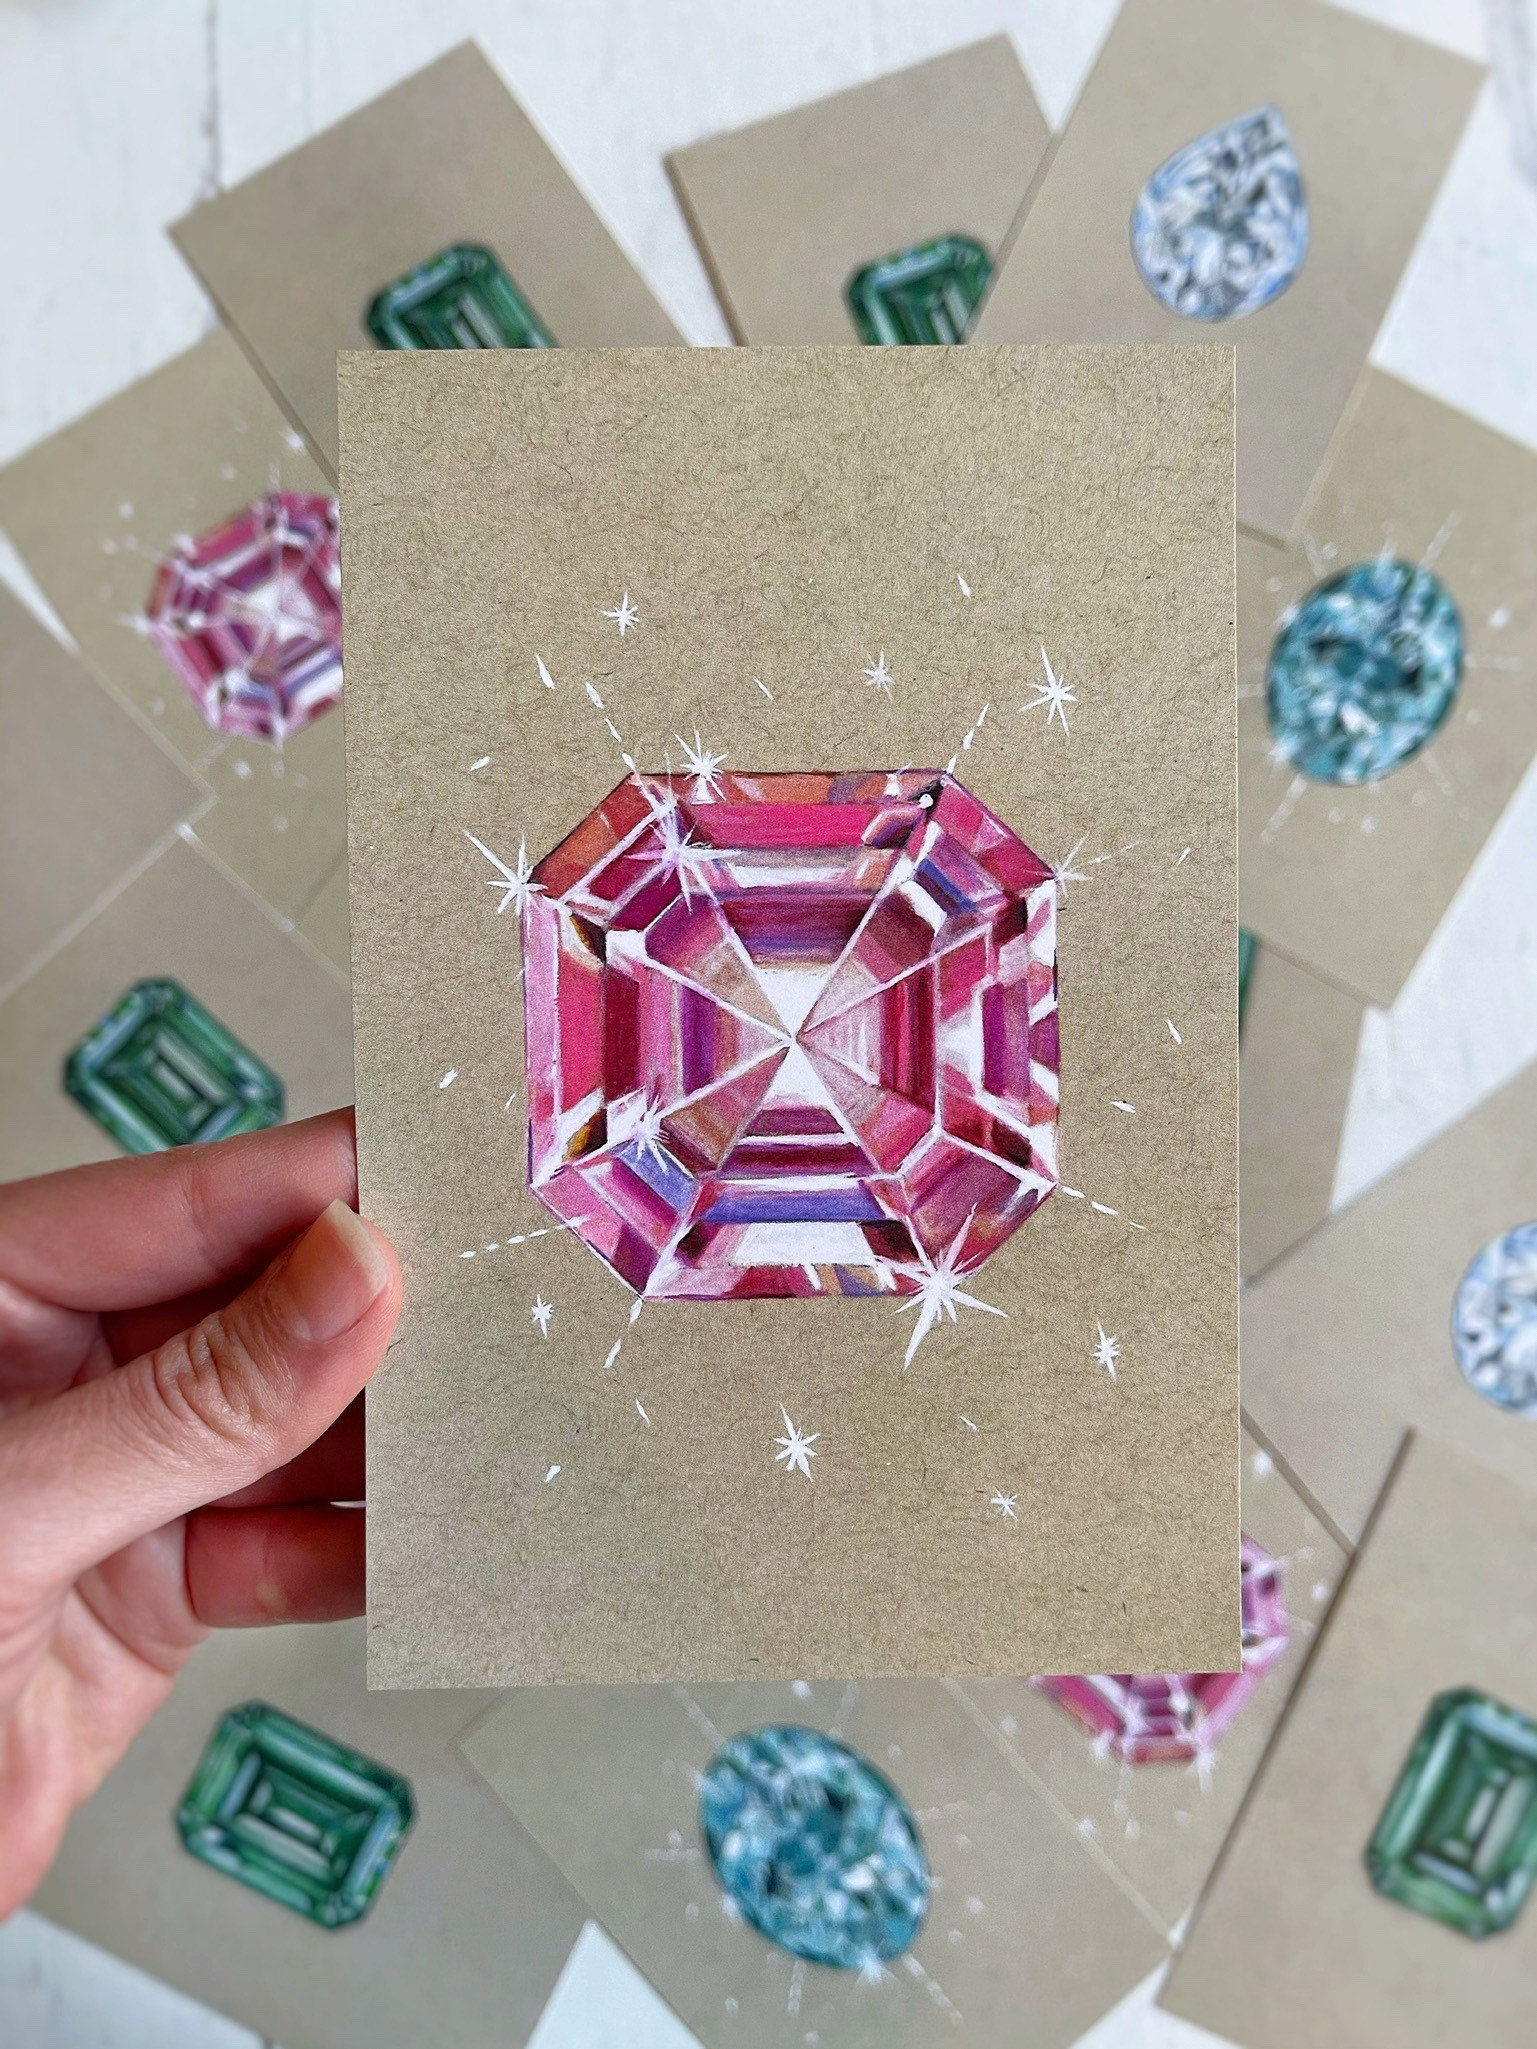 Faceted Gem Art Mini Prints 4x6 Colored Pencil Limited Collection Signed by Artist